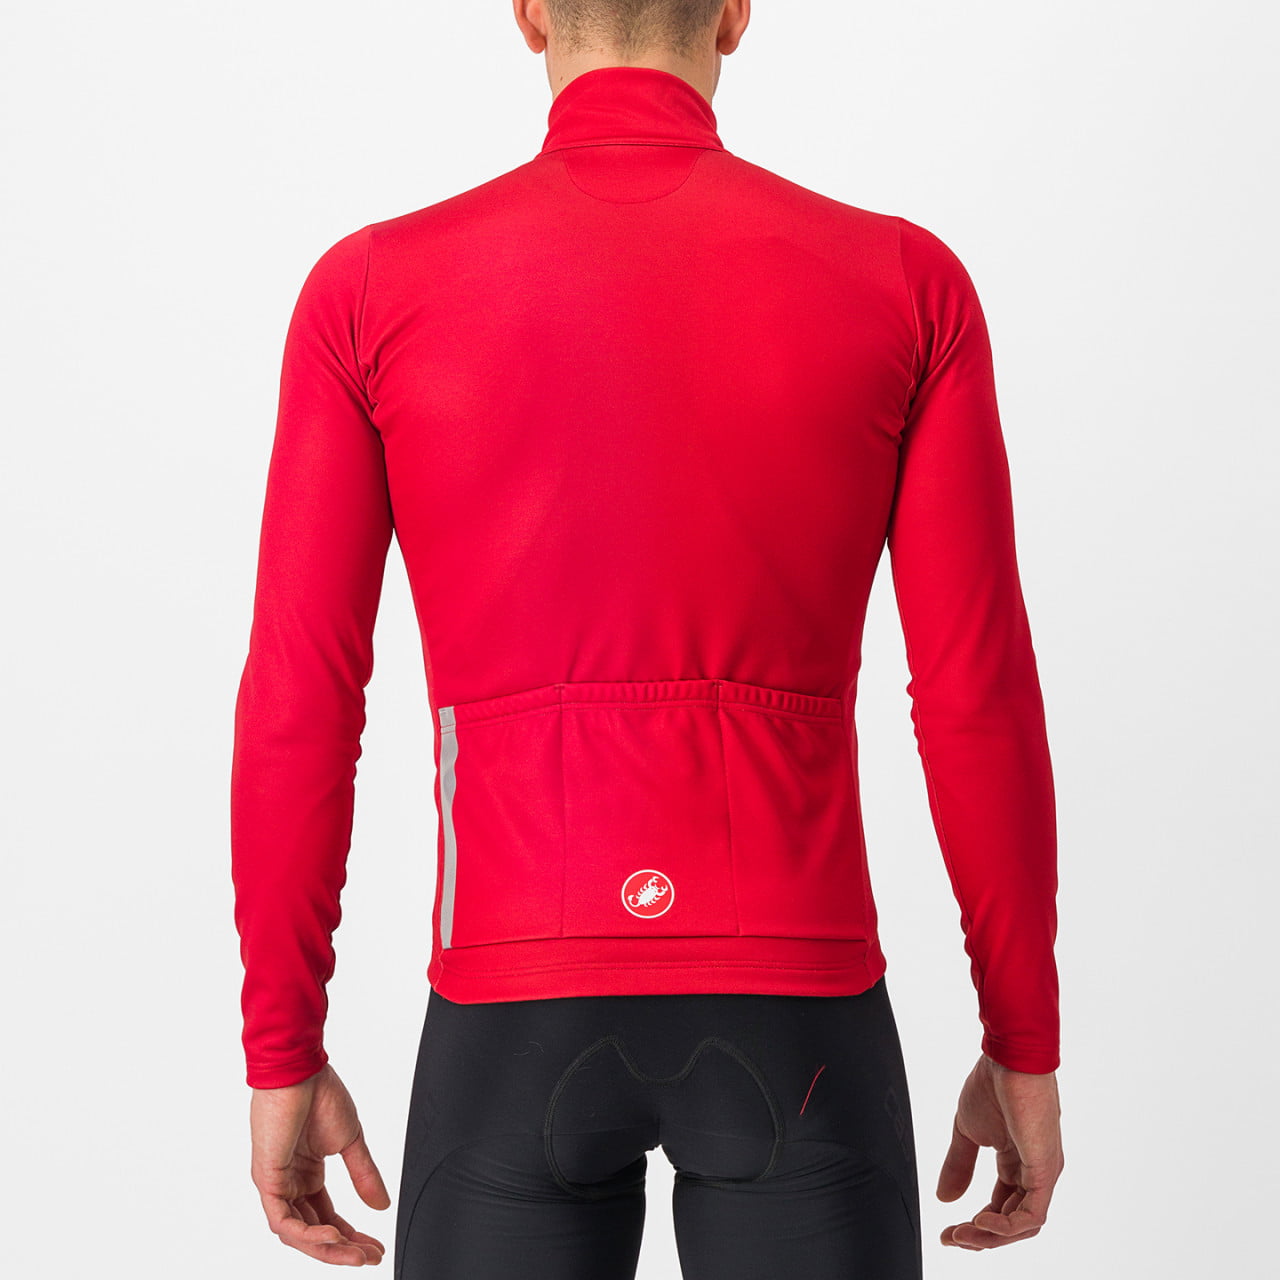 Entrata Thermal long-sleeved jersey